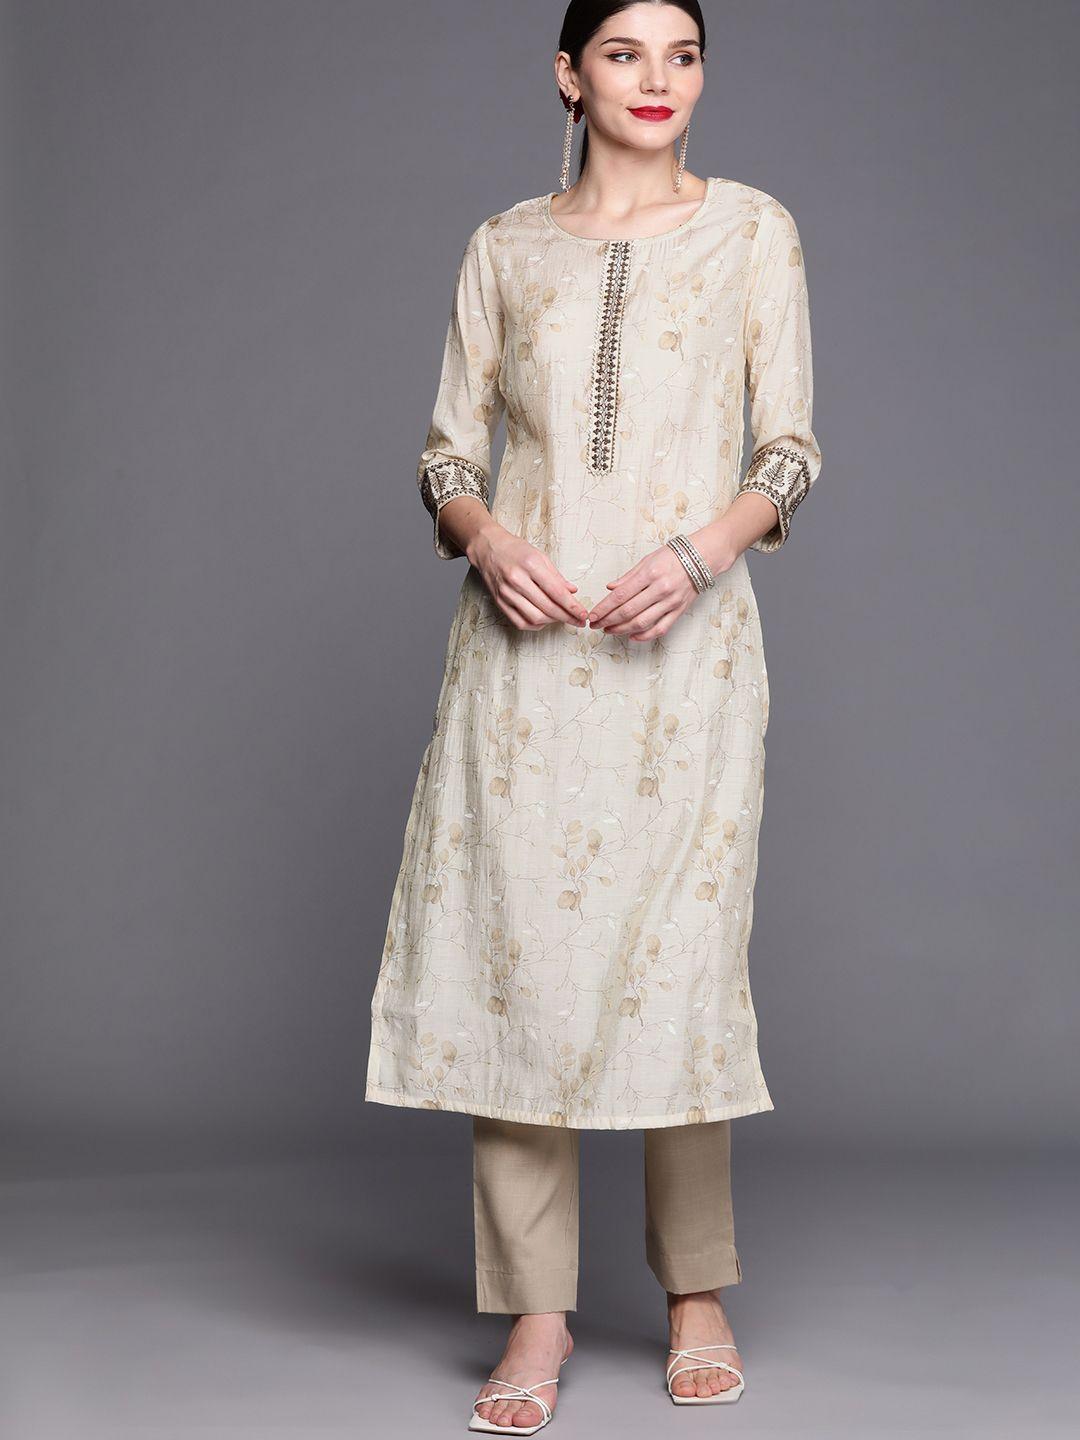 inddus women cream-coloured floral embroidered regular gotta patti kurta with trousers